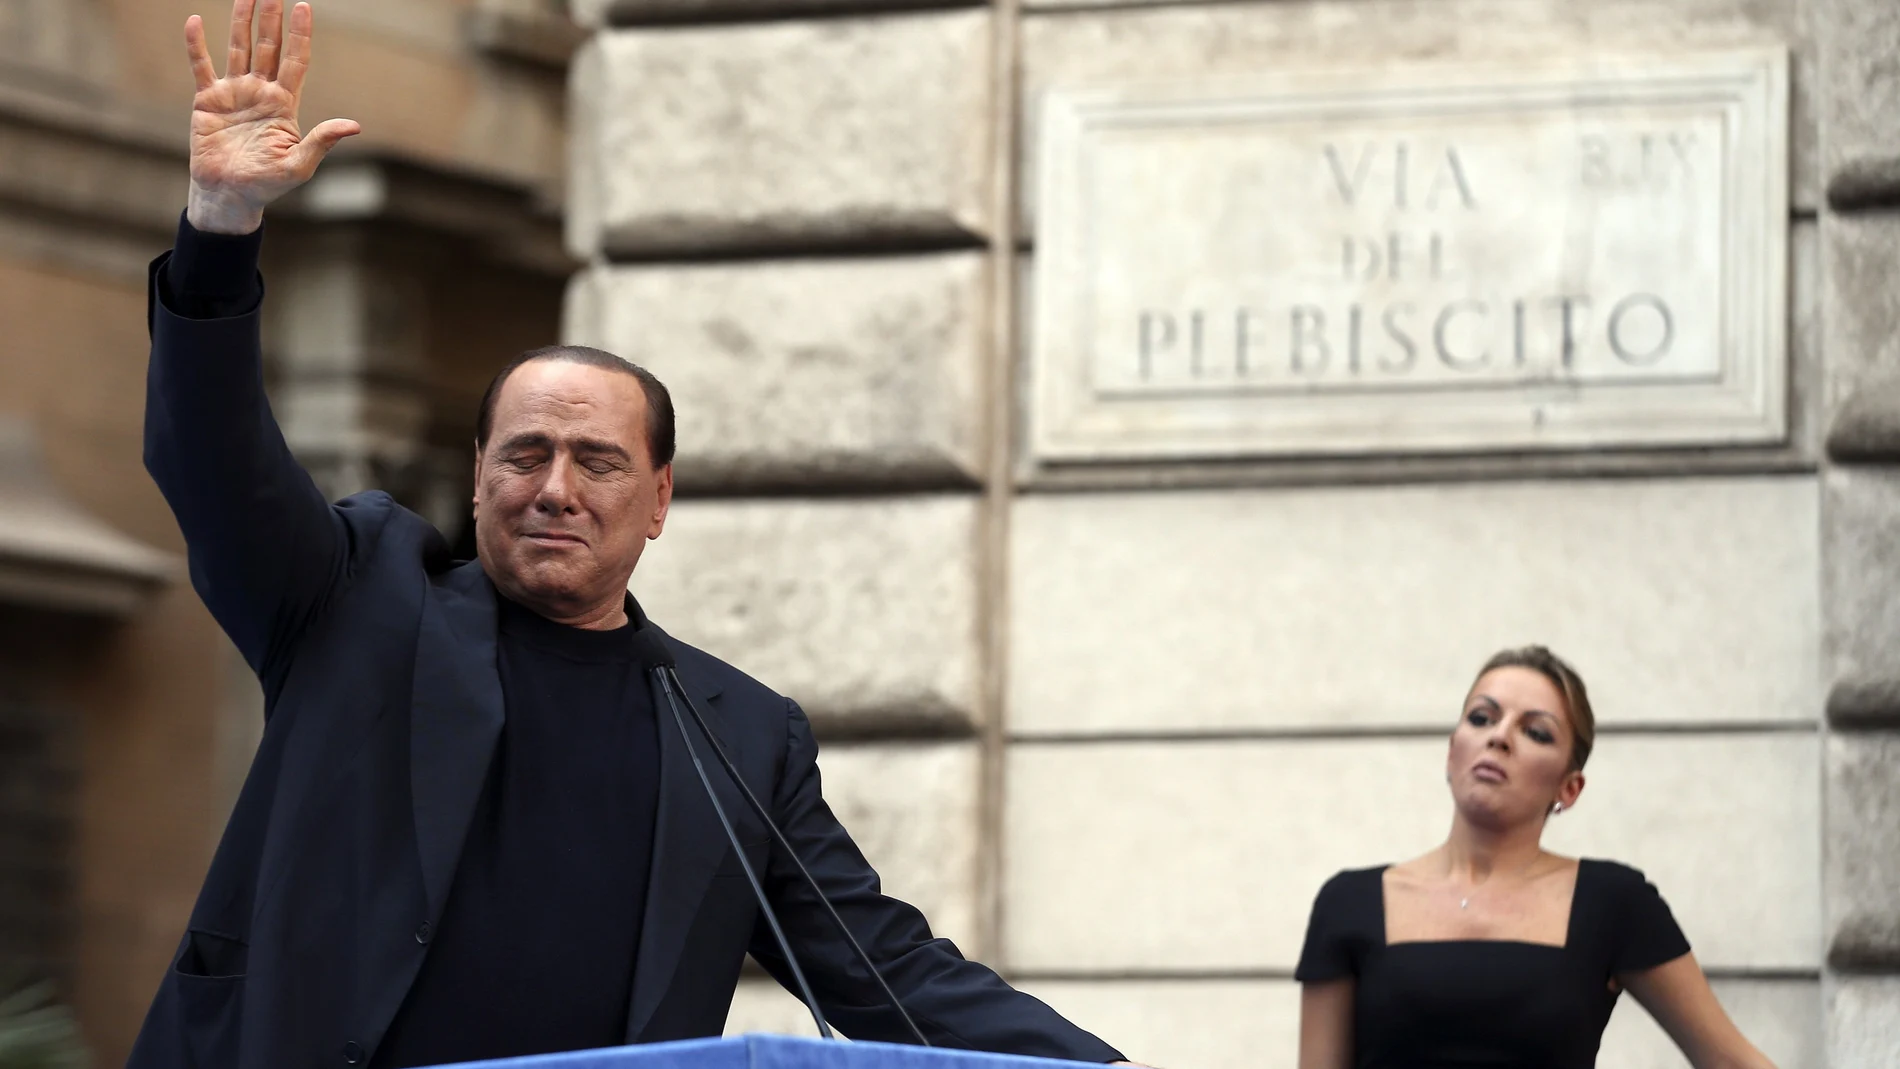 RNPS - PICTURES OF THE YEAR 2013 - Former Italian Prime Minister Silvio Berlusconi waves to supporters as his girlfriend Francesca Pascale looks on during a rally to protest his tax fraud conviction, outside his palace in central Rome August 4, 2013. Tensions in Italy's squabbling coalition heightened ahead of a rally by supporters of Berlusconi in Rome in protest at a tax fraud conviction that threatens his future in politics and the fragile government. REUTERS/Alessandro Bianchi (ITALY - Tags: POLITICS CIVIL UNREST TPX)